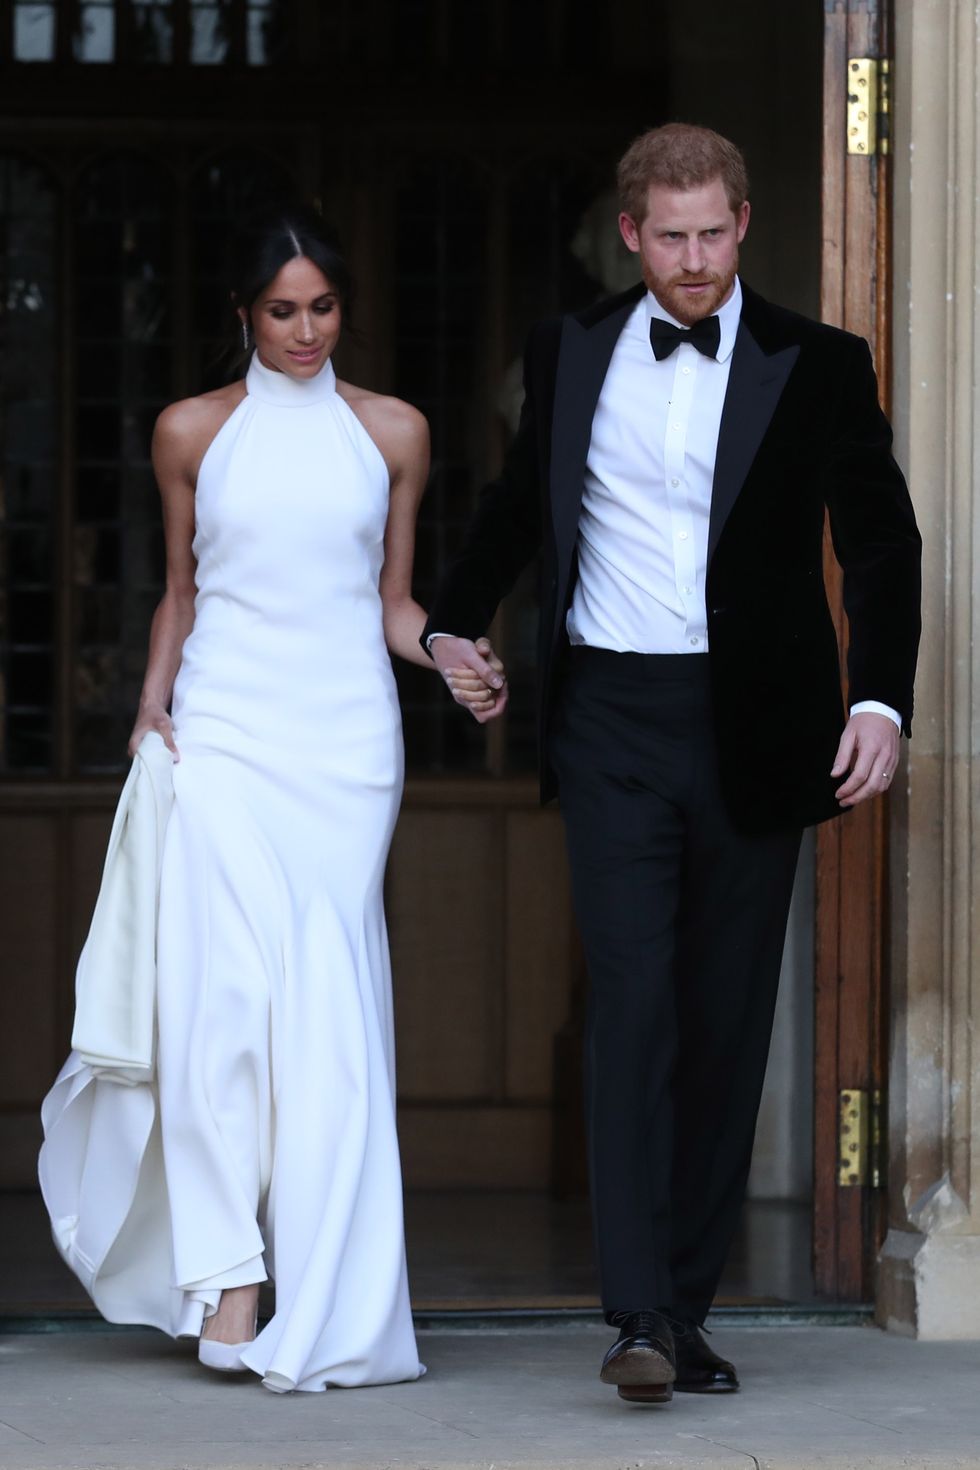 windsor, united kingdom   may 19 duchess of sussex and prince harry, duke of sussex leave windsor castle after their wedding to attend an evening reception at frogmore house, hosted by the prince of wales on may 19, 2018 in windsor, england photo by steve parsons   wpa poolgetty images